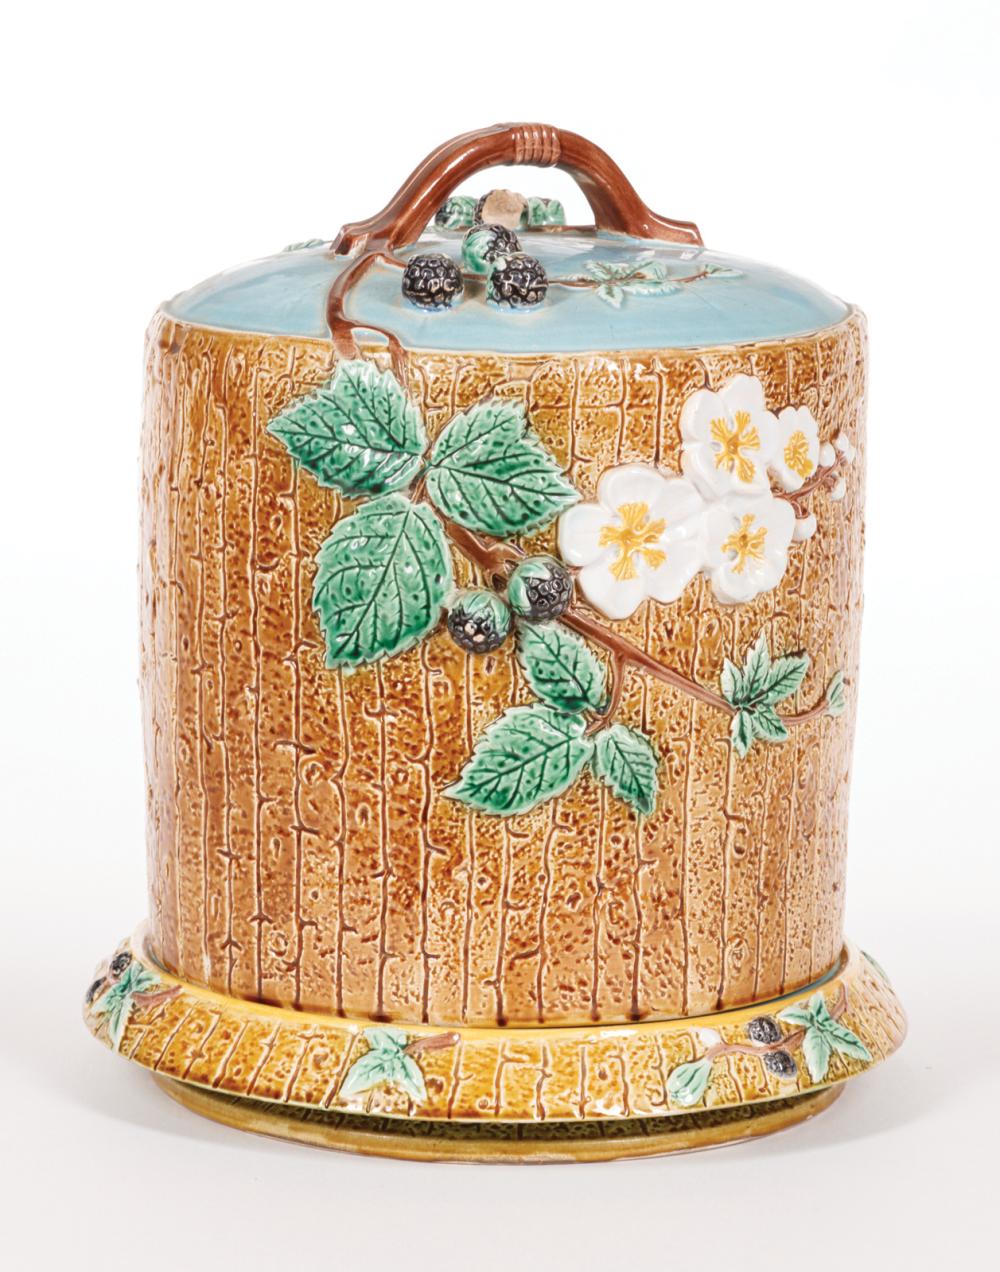 HOLDCROFT MAJOLICA CHEESE DOME